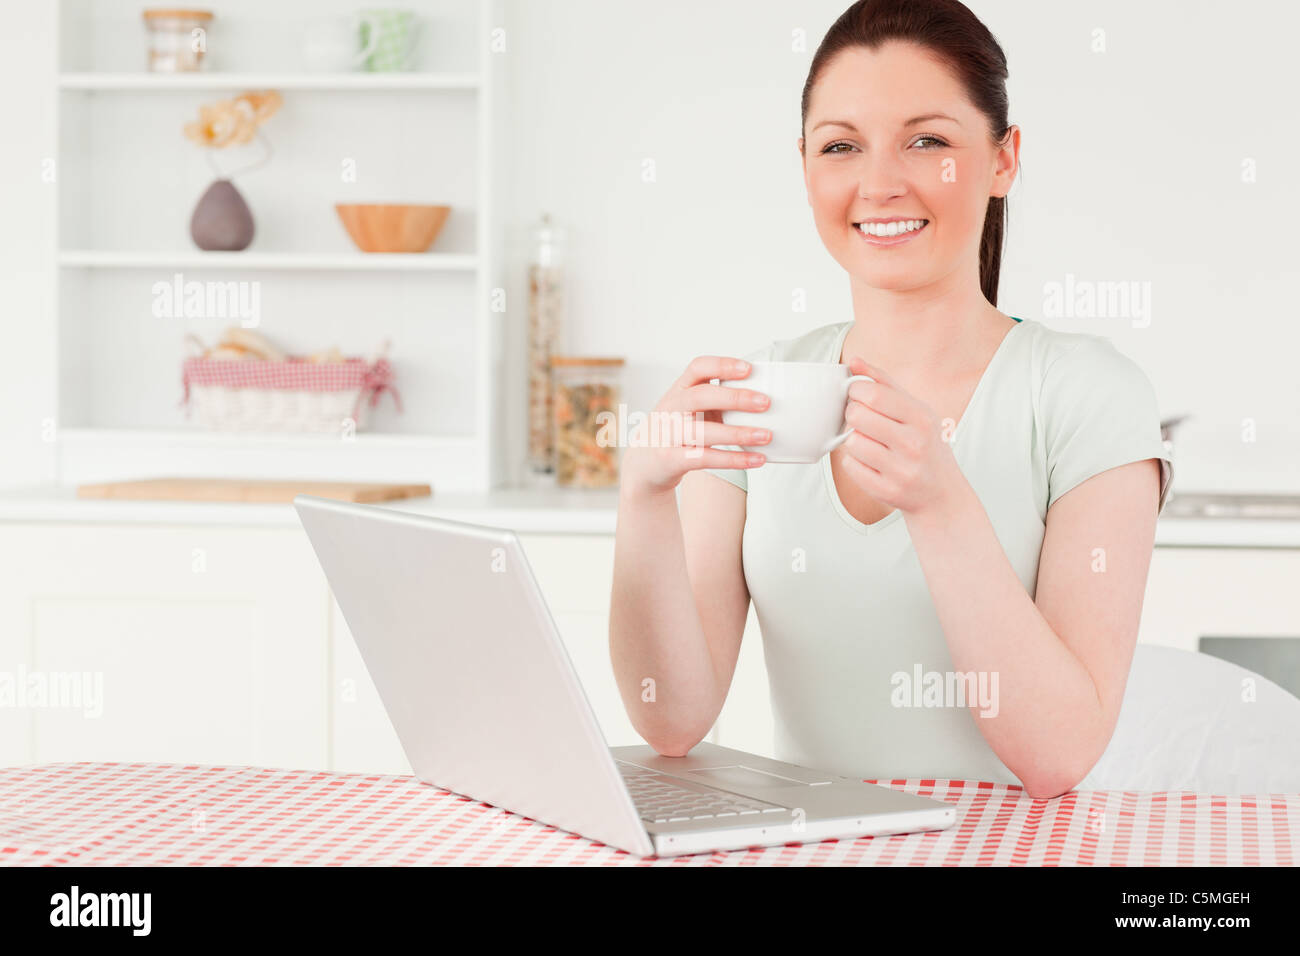 Attractive woman relaxing on her laptop while drinking a cup of tea Stock Photo